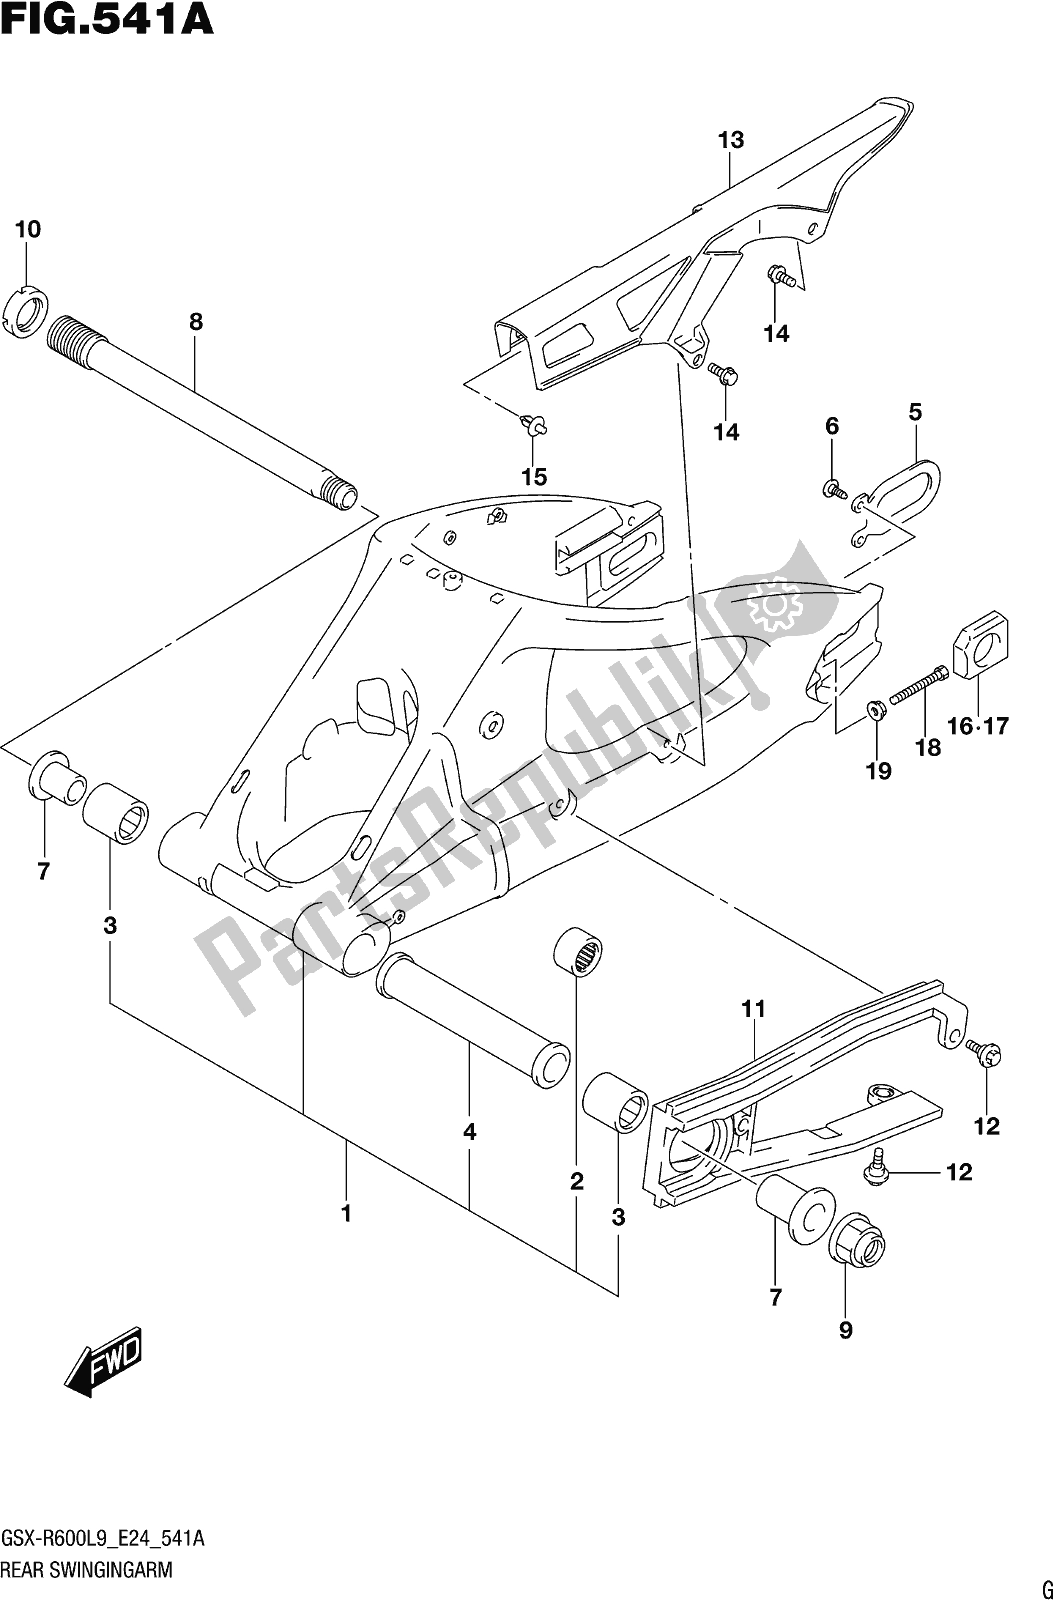 All parts for the Fig. 541a Rear Swingingarm of the Suzuki Gsx-r 600 2019